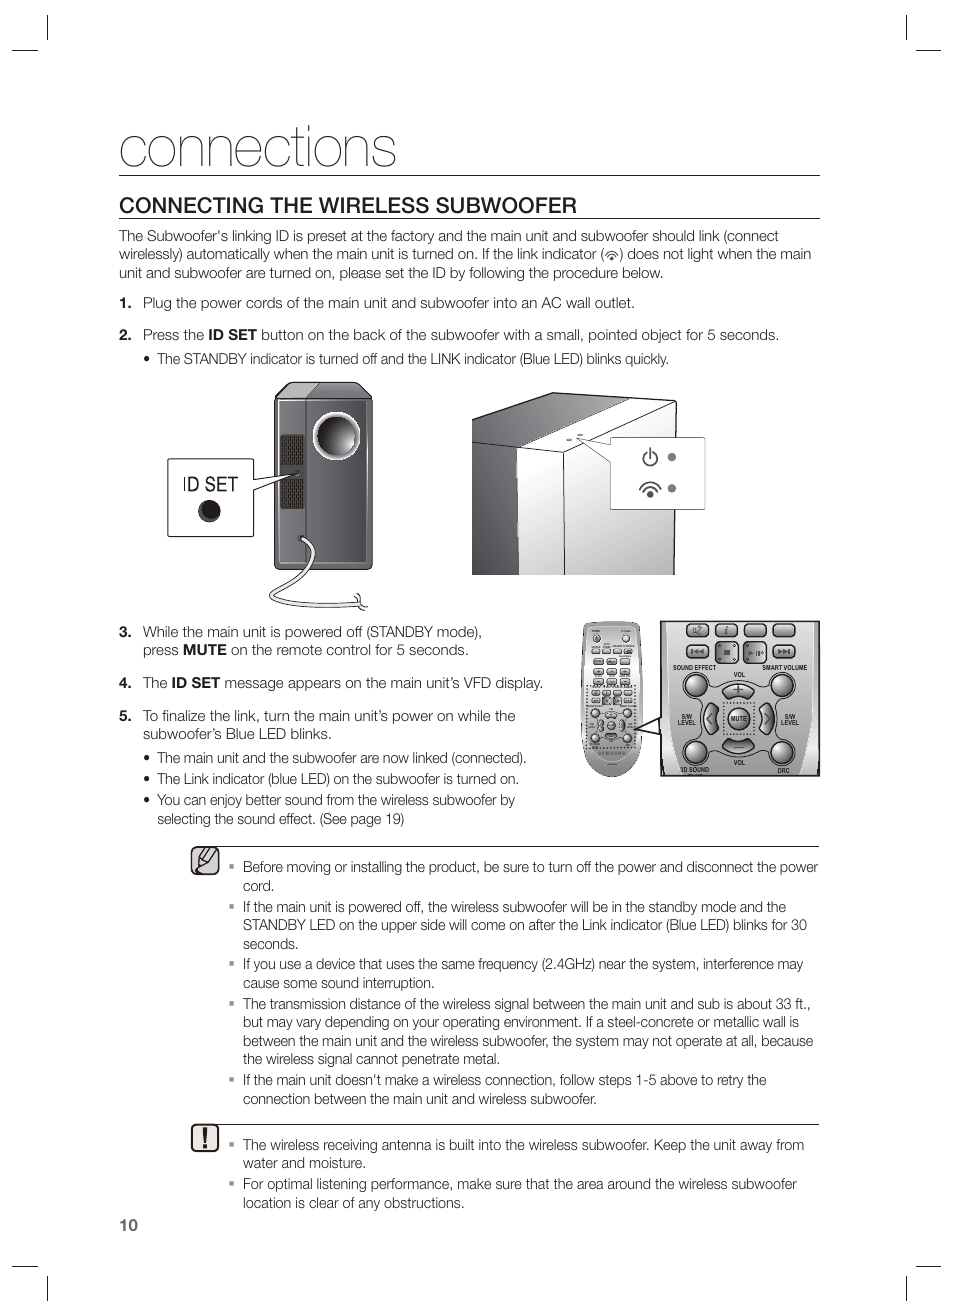 Connecting the wireless subwoofer, Connections | Samsung HW-F450-ZA